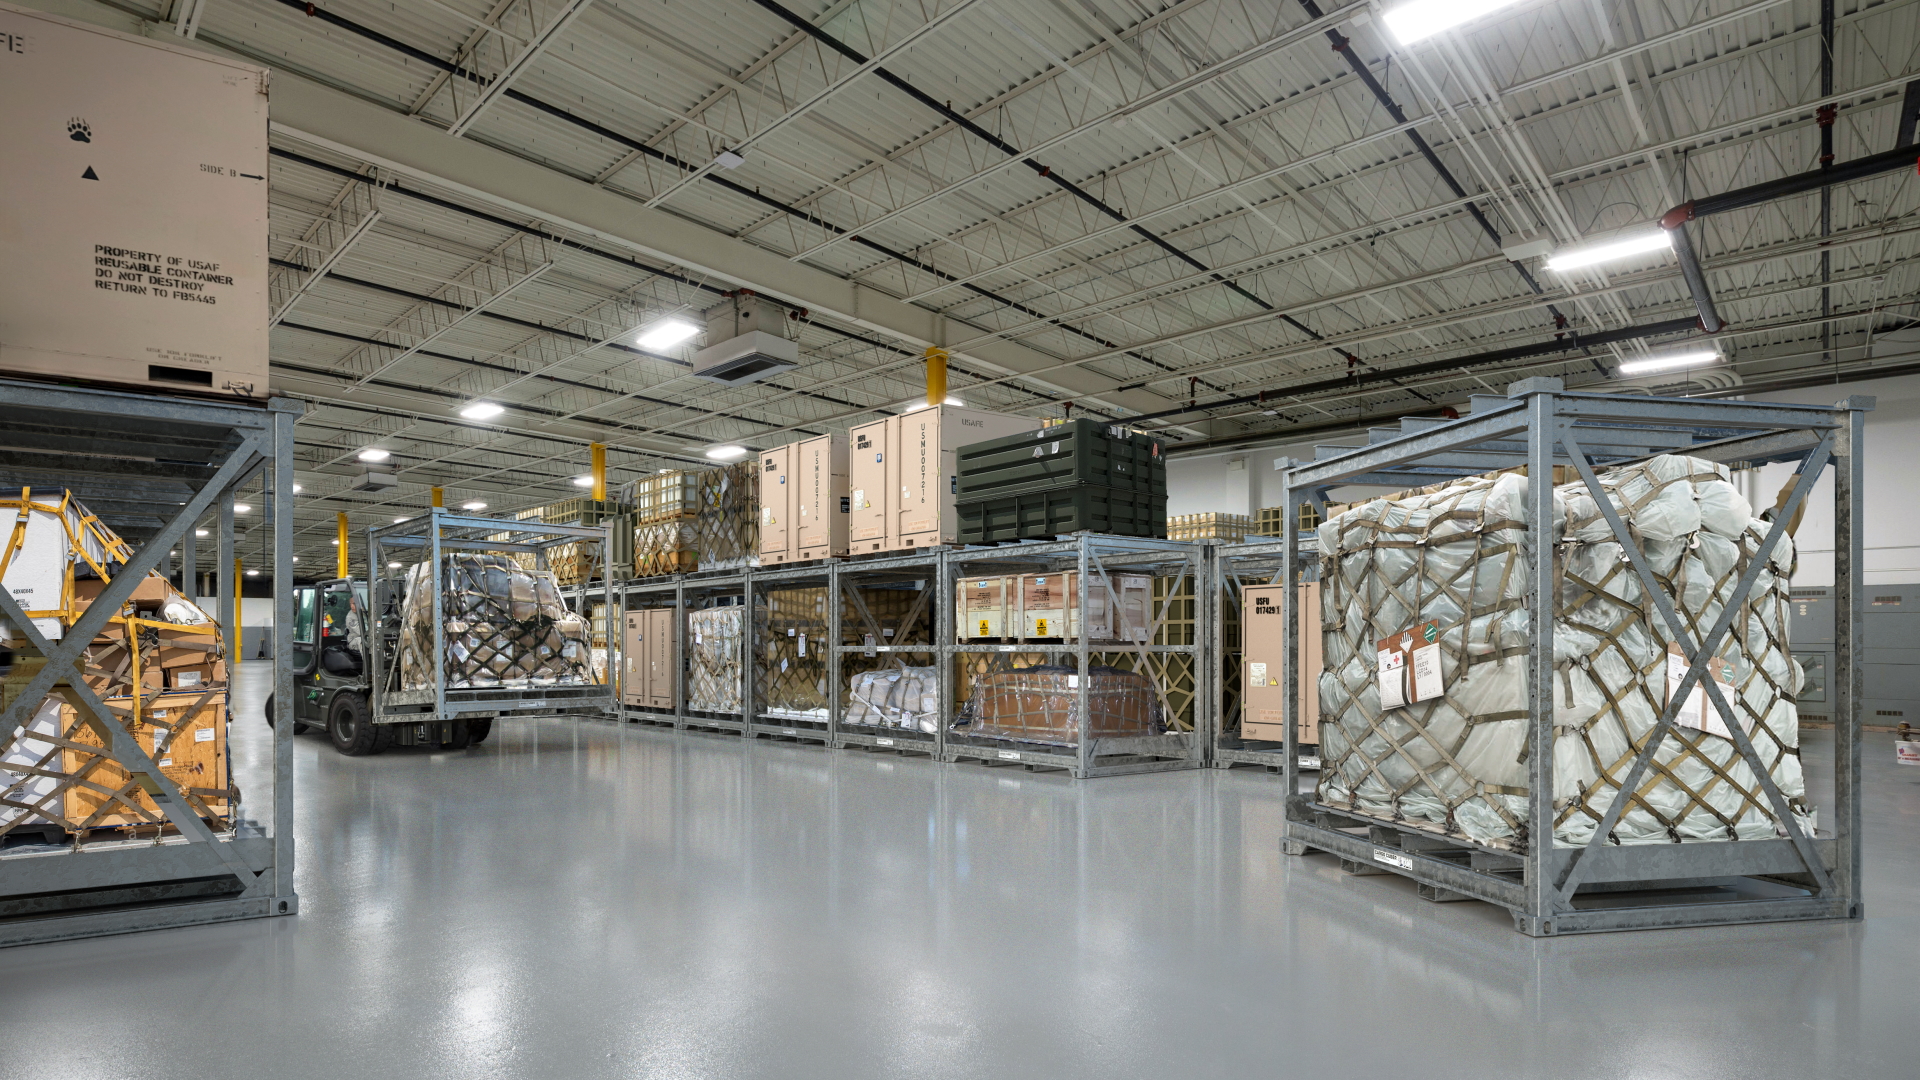 Military storage equipment for rapid deployment